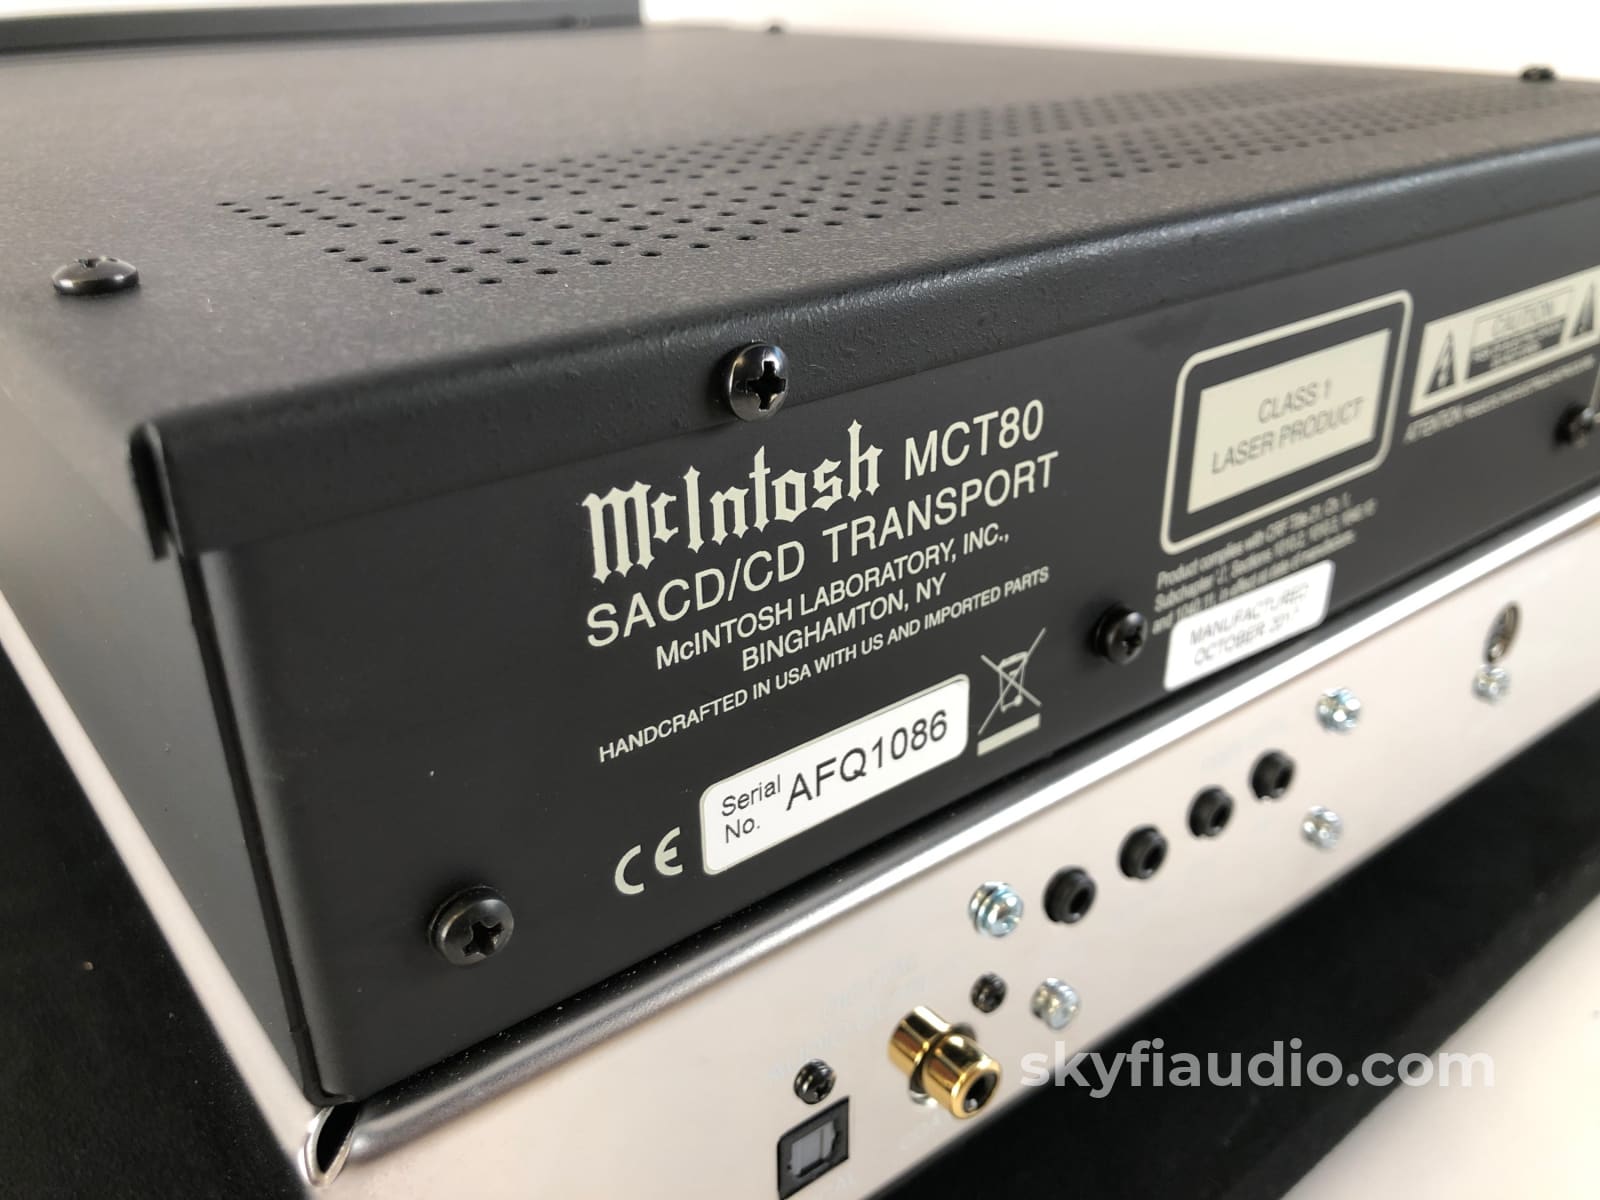 Mcintosh Mct80 Sacd/Cd Transport - In Store Only Cd + Digital